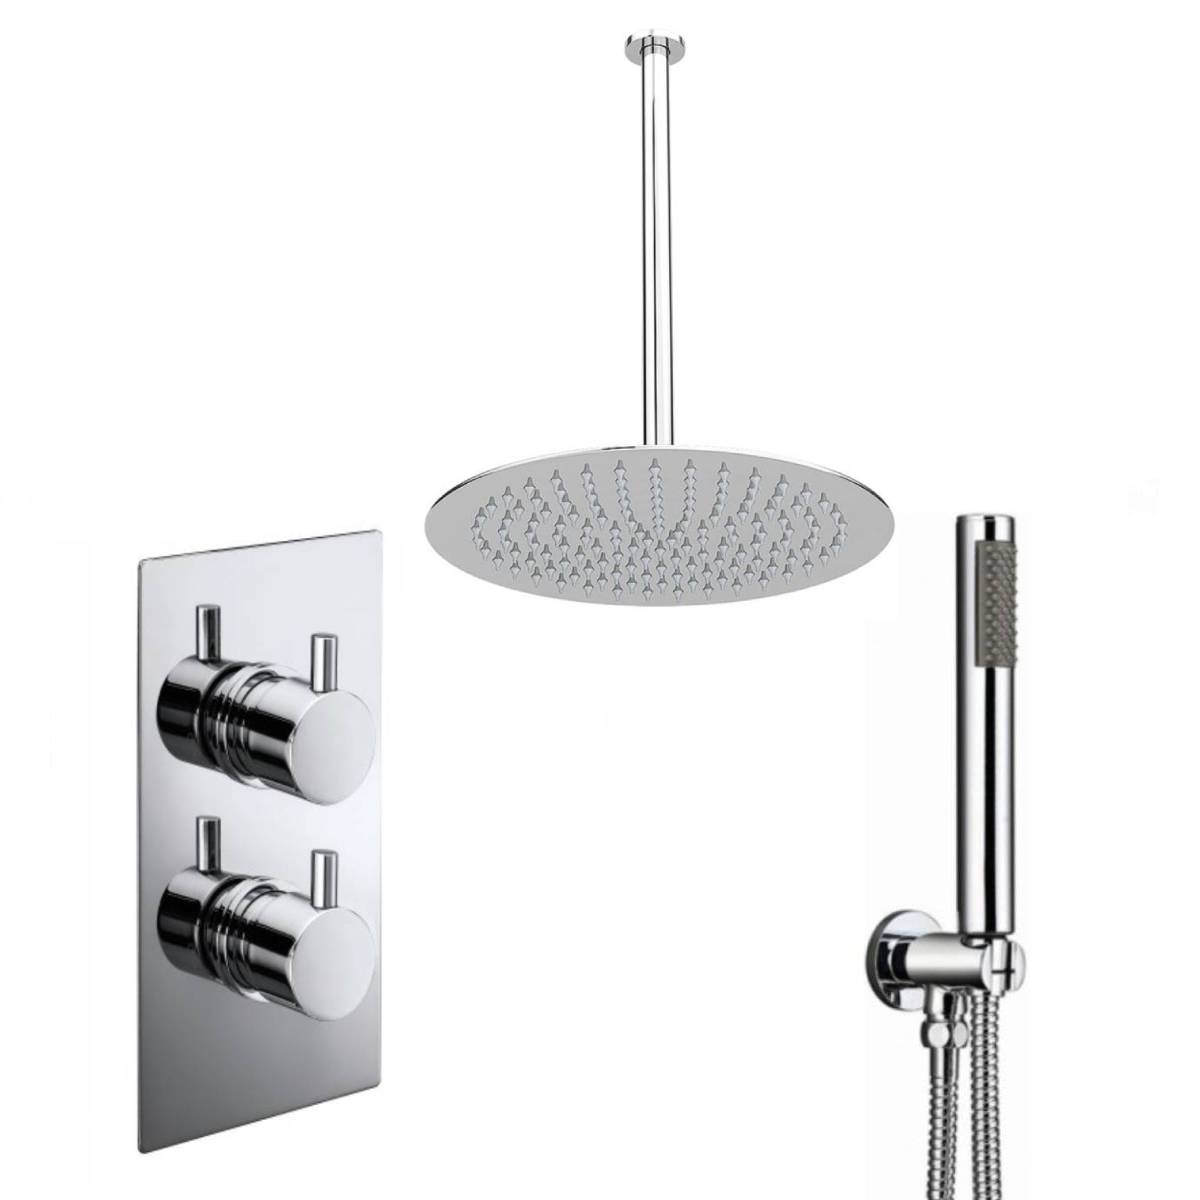 Round Twin Thermostatic Concealed Mixer Shower Kit with Ceiling Mounted 200mm Shower Head & Handset (12493)